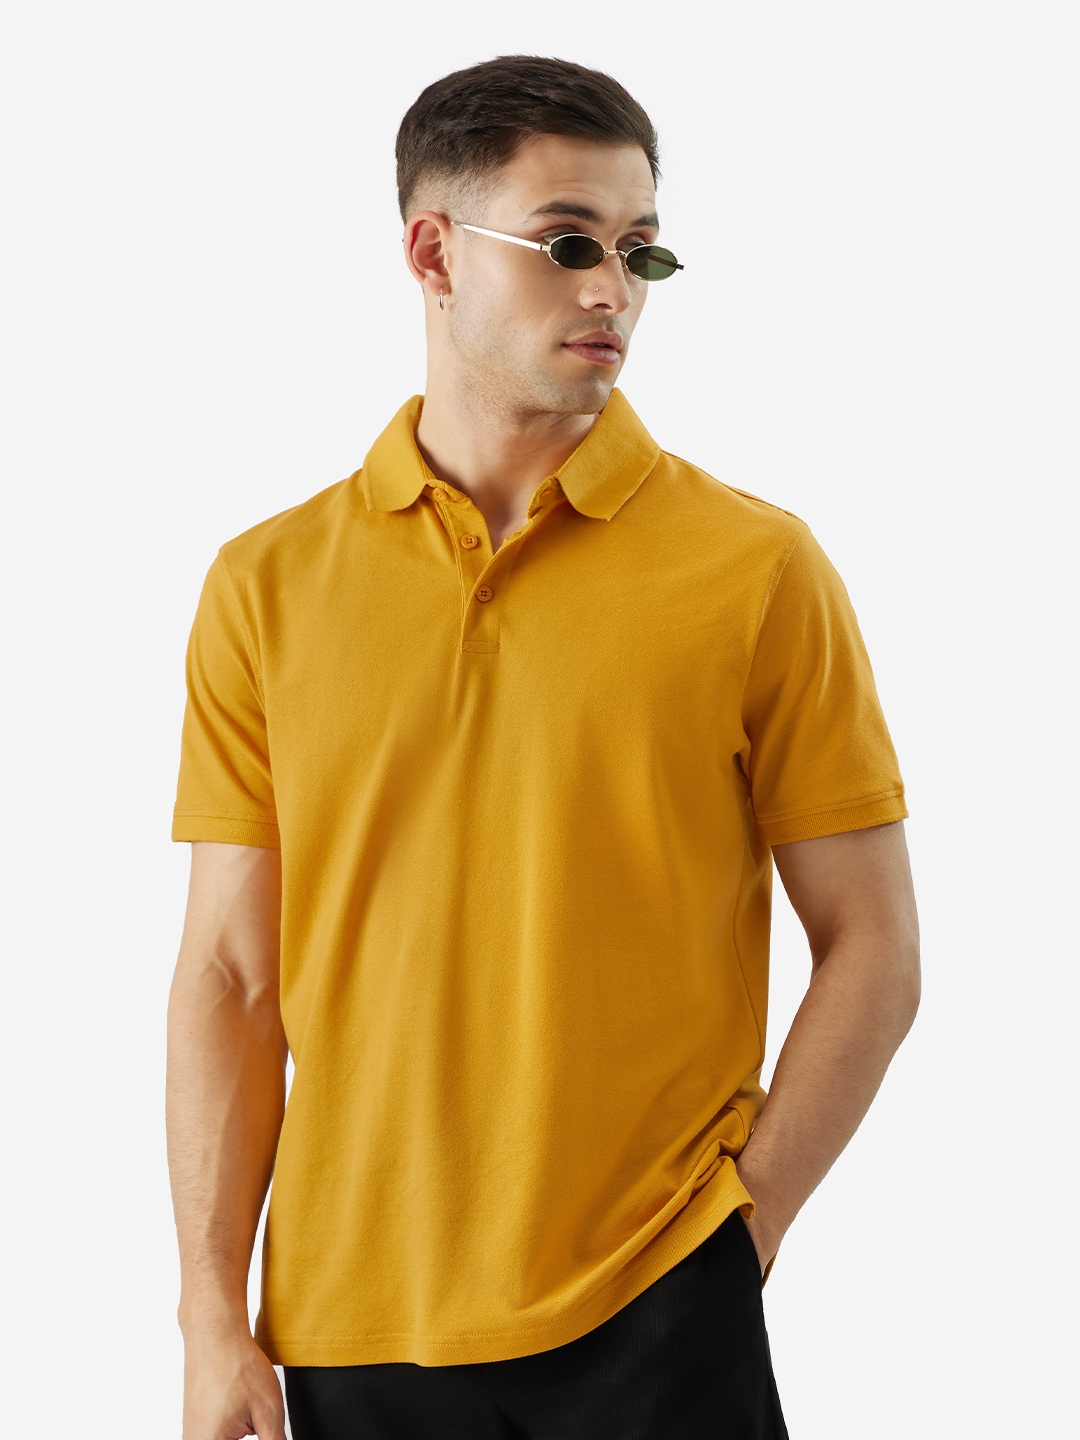 The Souled Store | Men's Solids: Ochre Polo T-Shirt